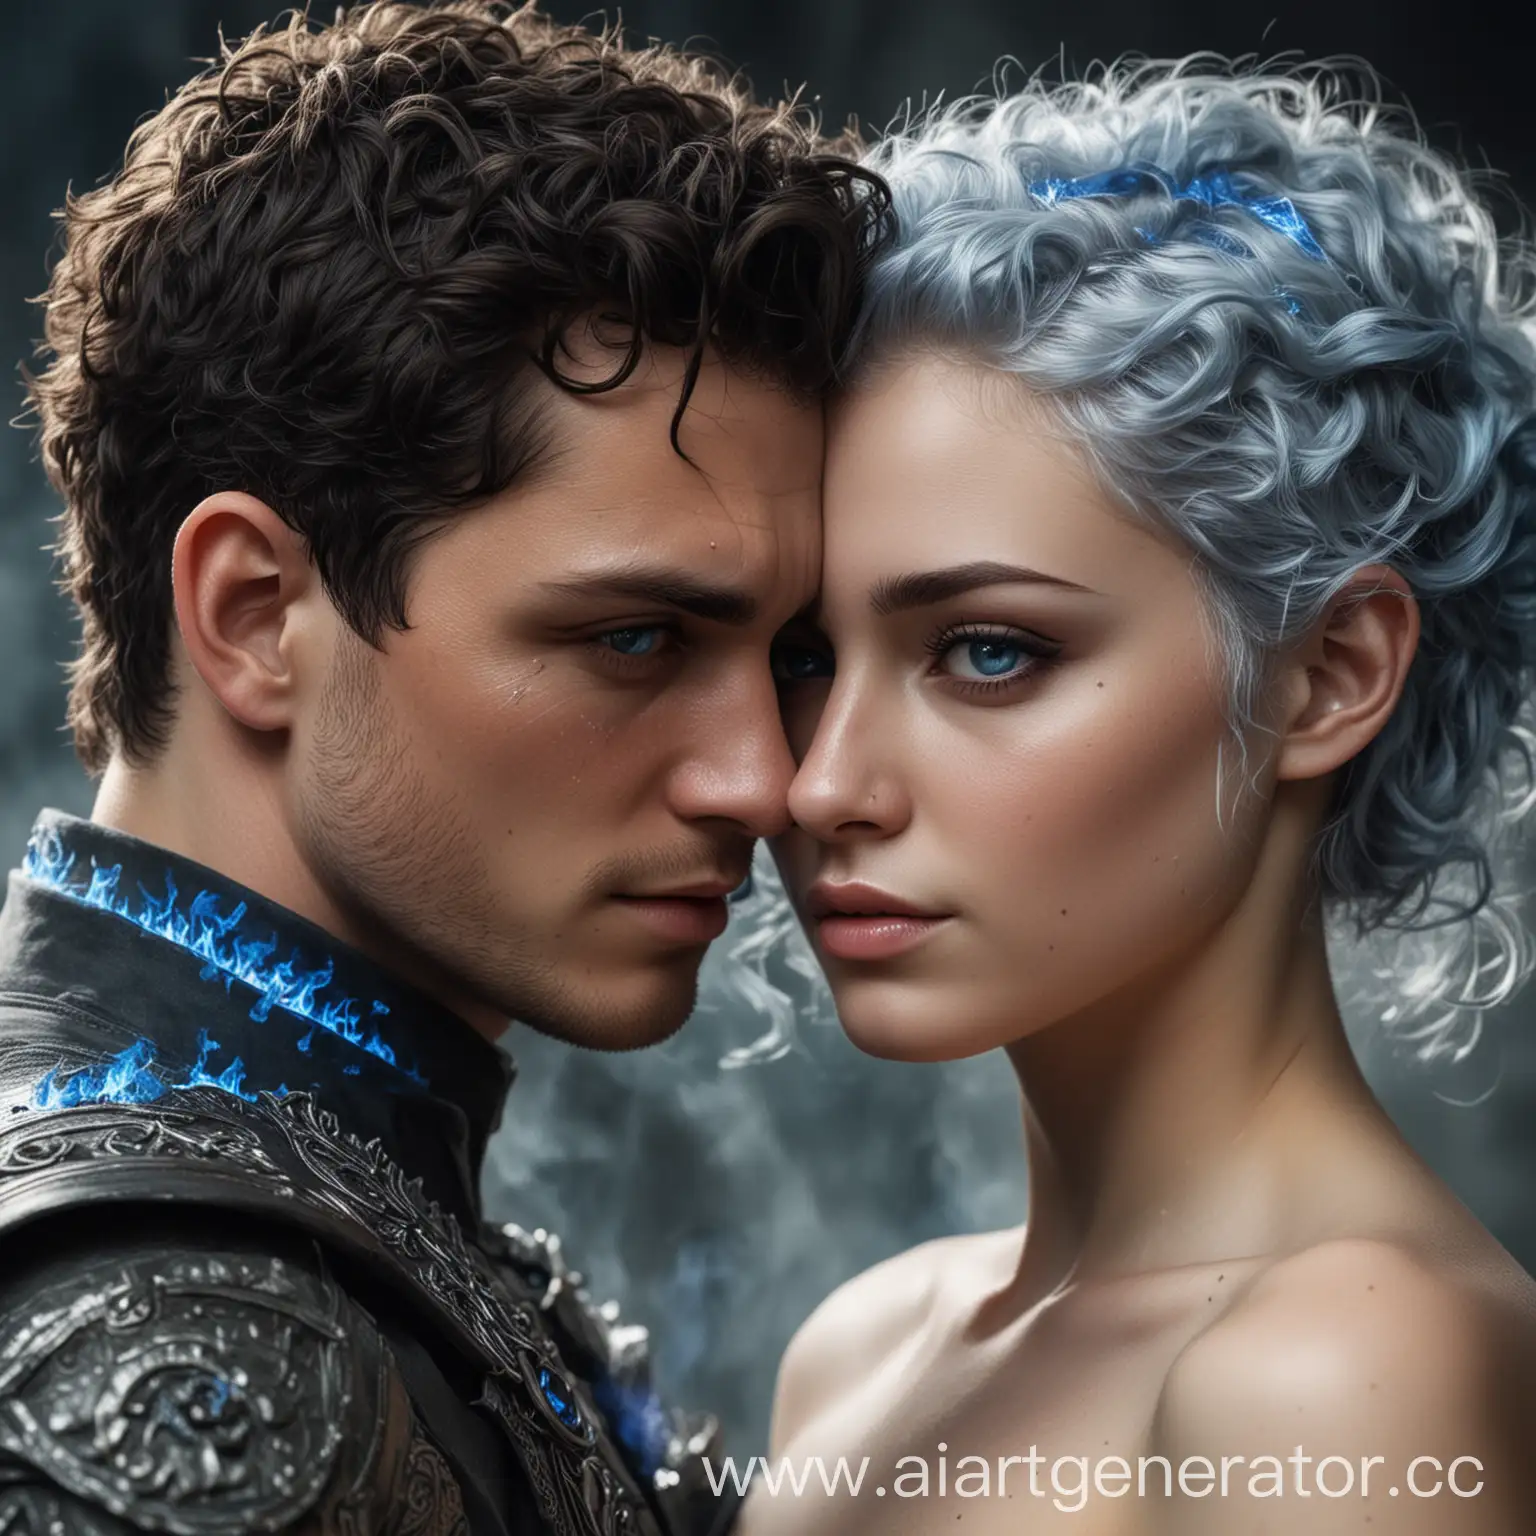 Wedding-of-a-CurlyHaired-Girl-and-a-Man-with-Blue-Fire-Abilities